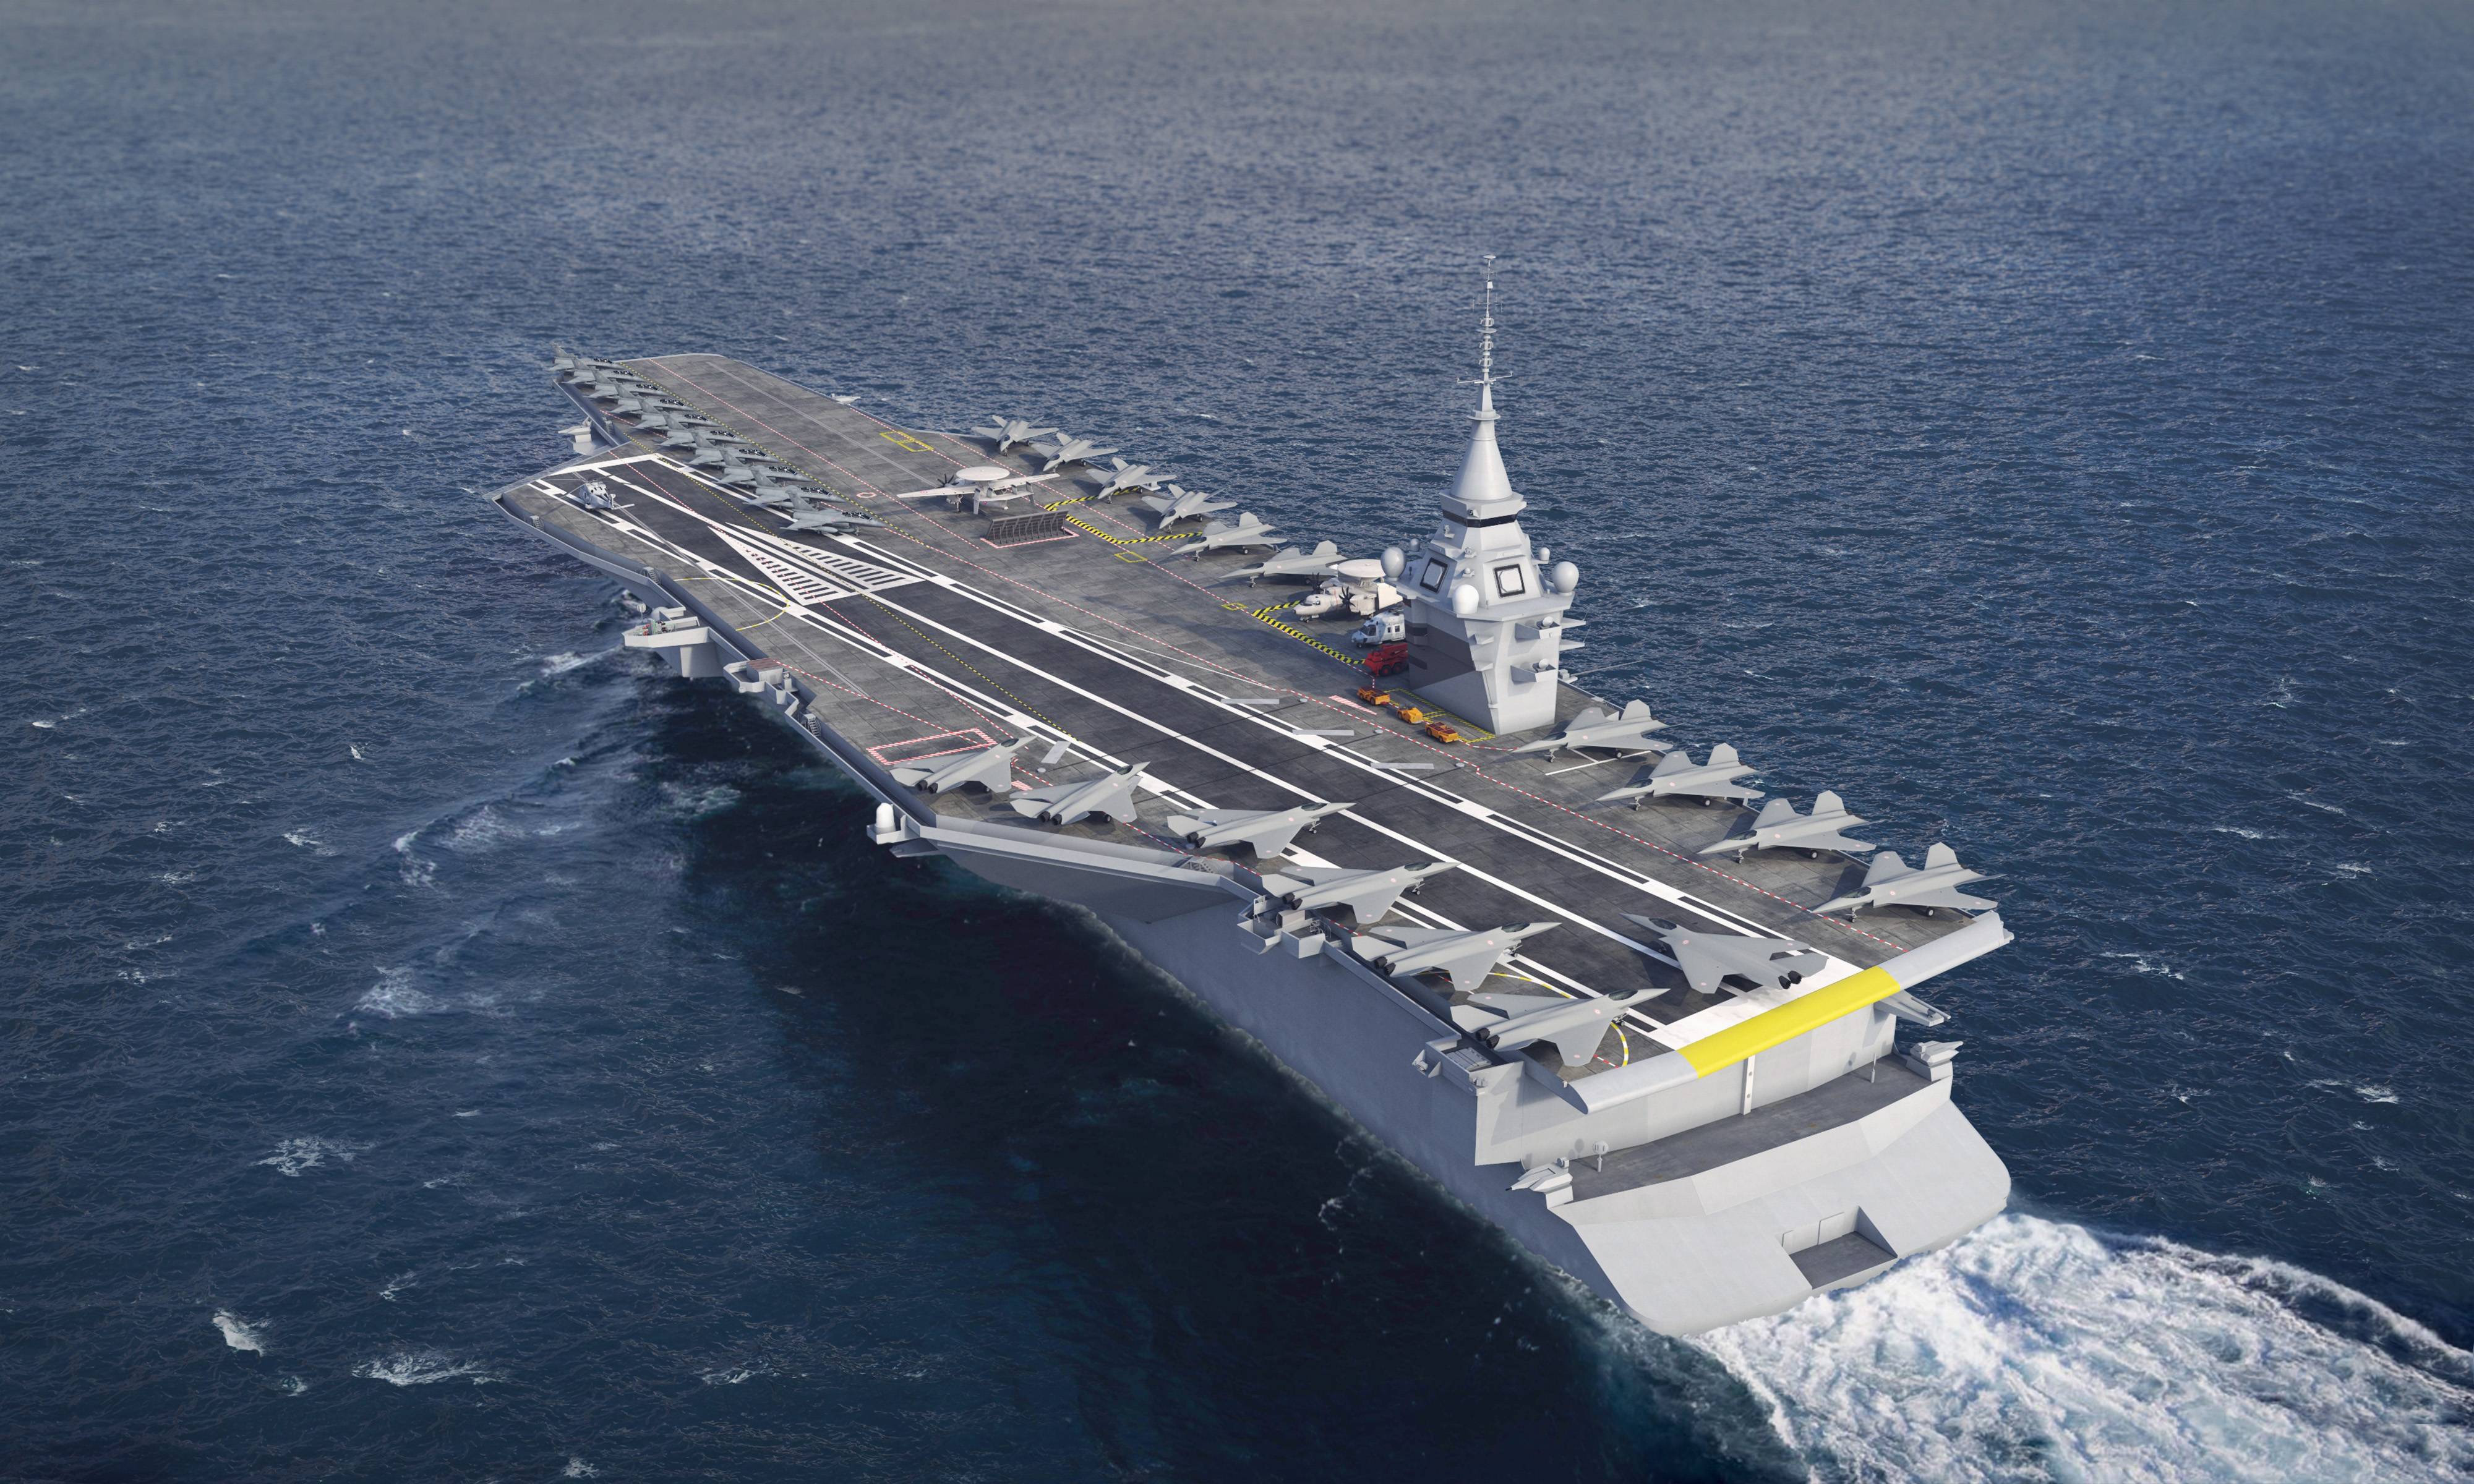 Macron: France's next-generation aircraft carrier will be nuclear-powered